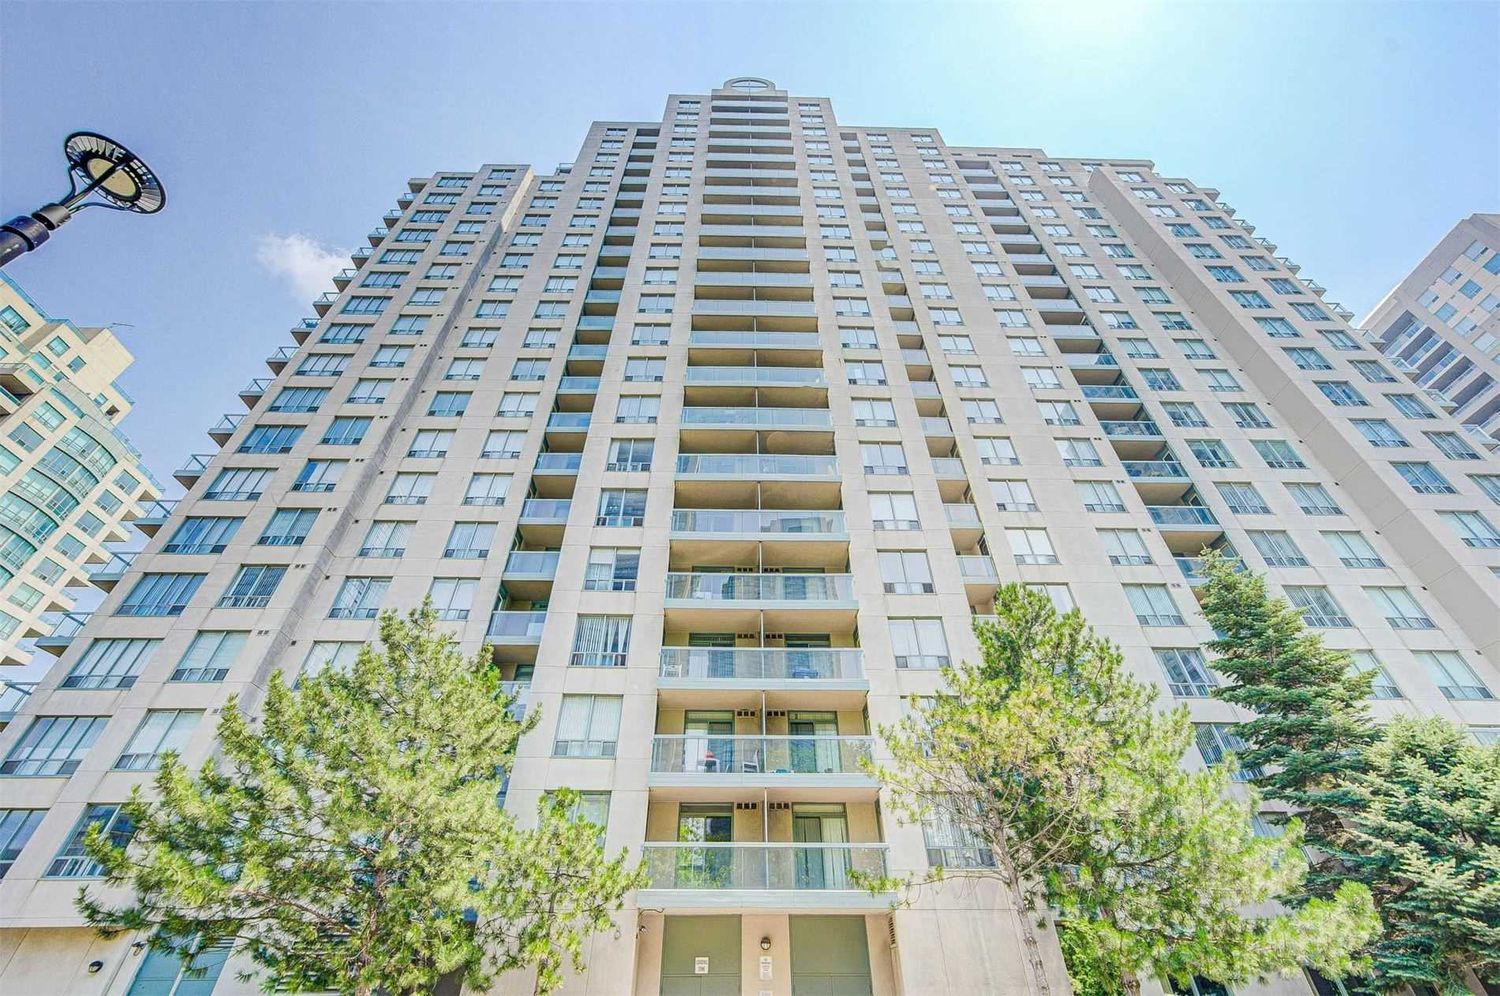 28 Empress Avenue. The Majestic Condos is located in  North York, Toronto - image #2 of 2